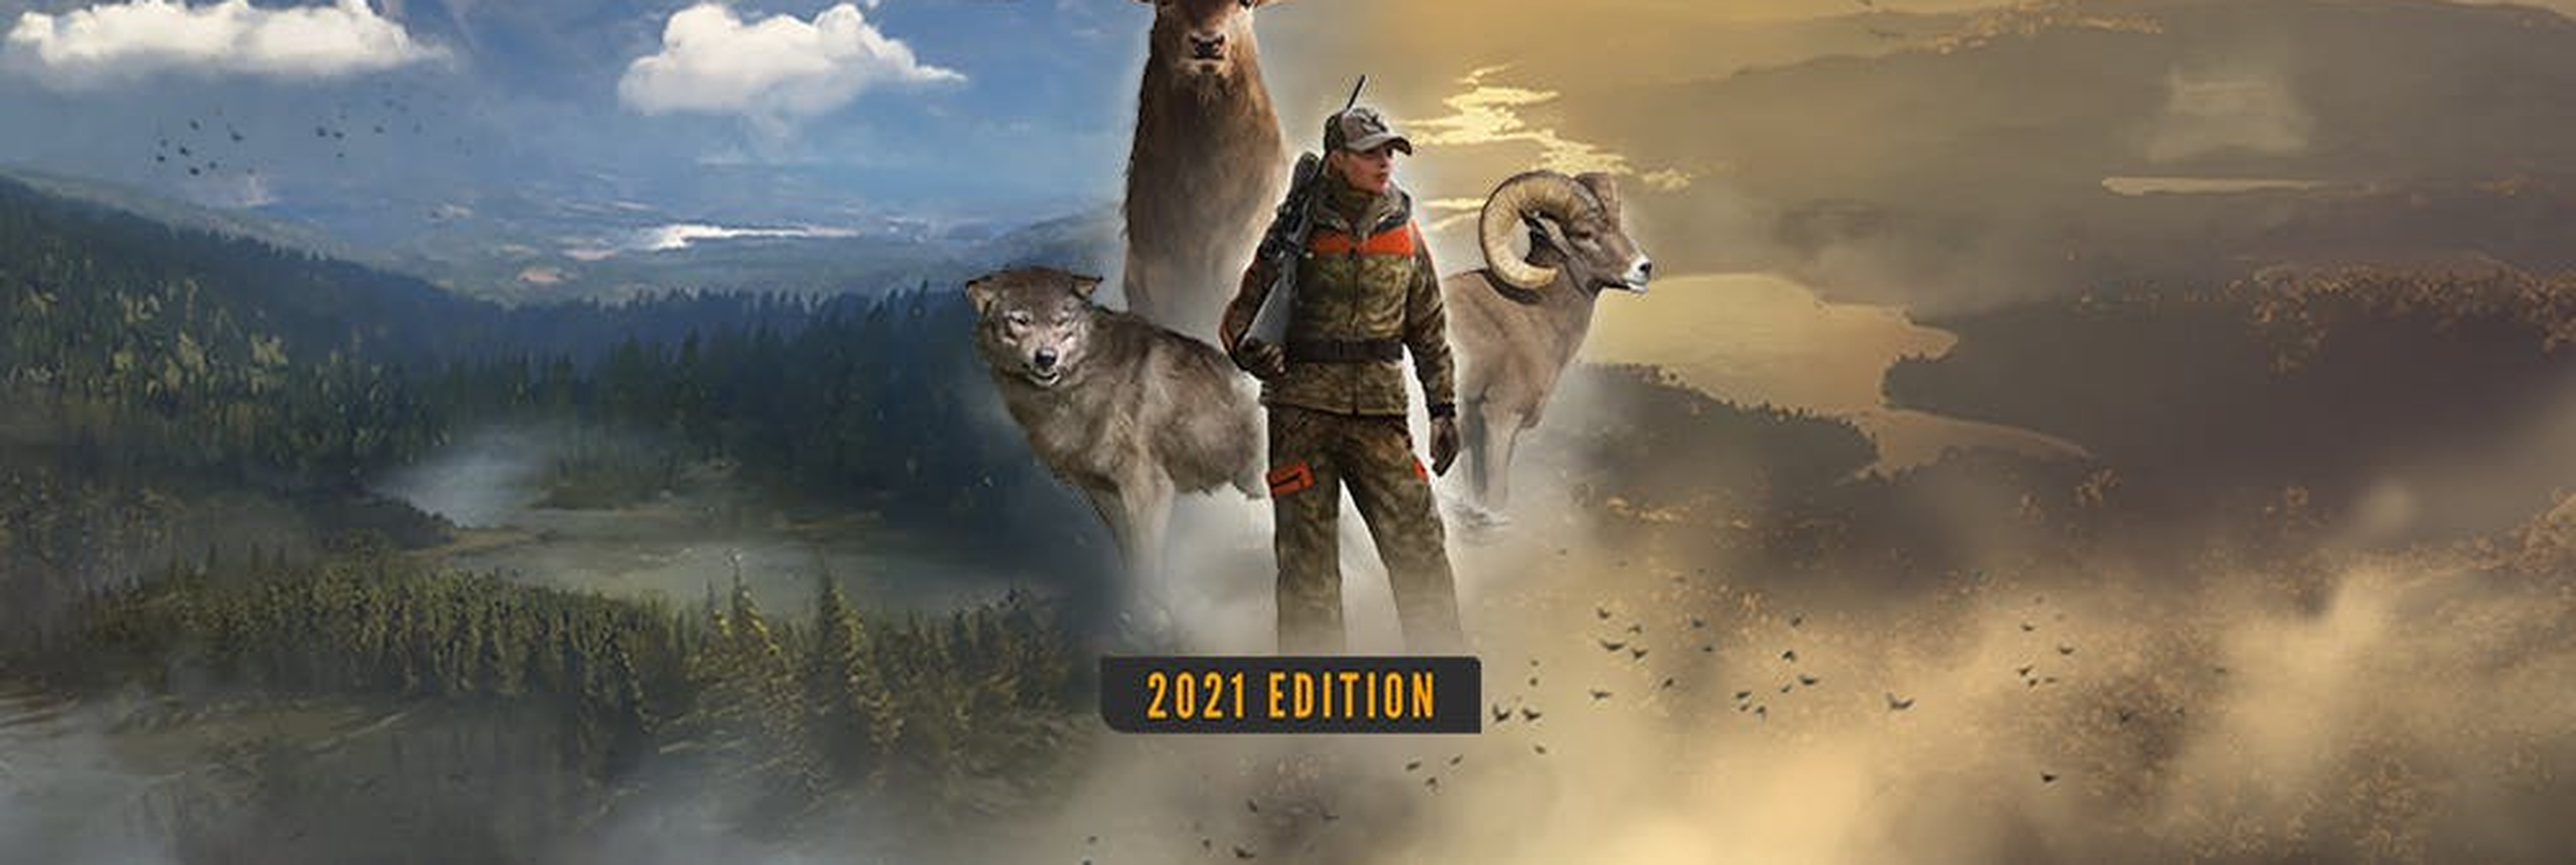 theHunter: Call of the Wild 2021 Edition Review